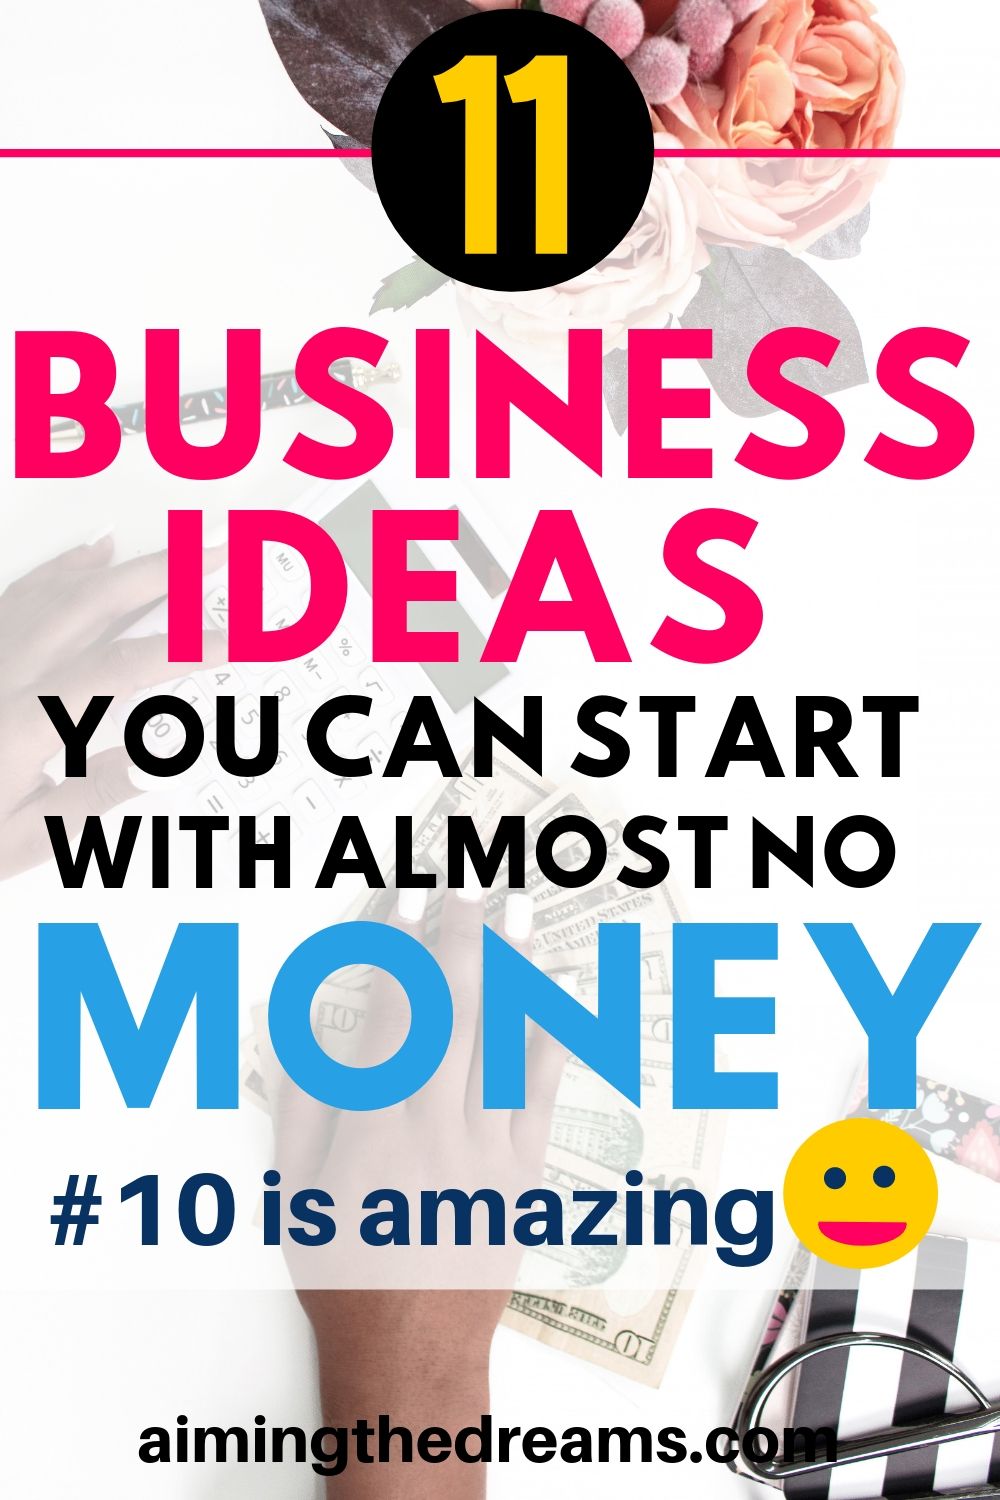 11 business ideas you can start with almost no money. Own business ideas, side hustle ideas, work from home jobs to make money online.